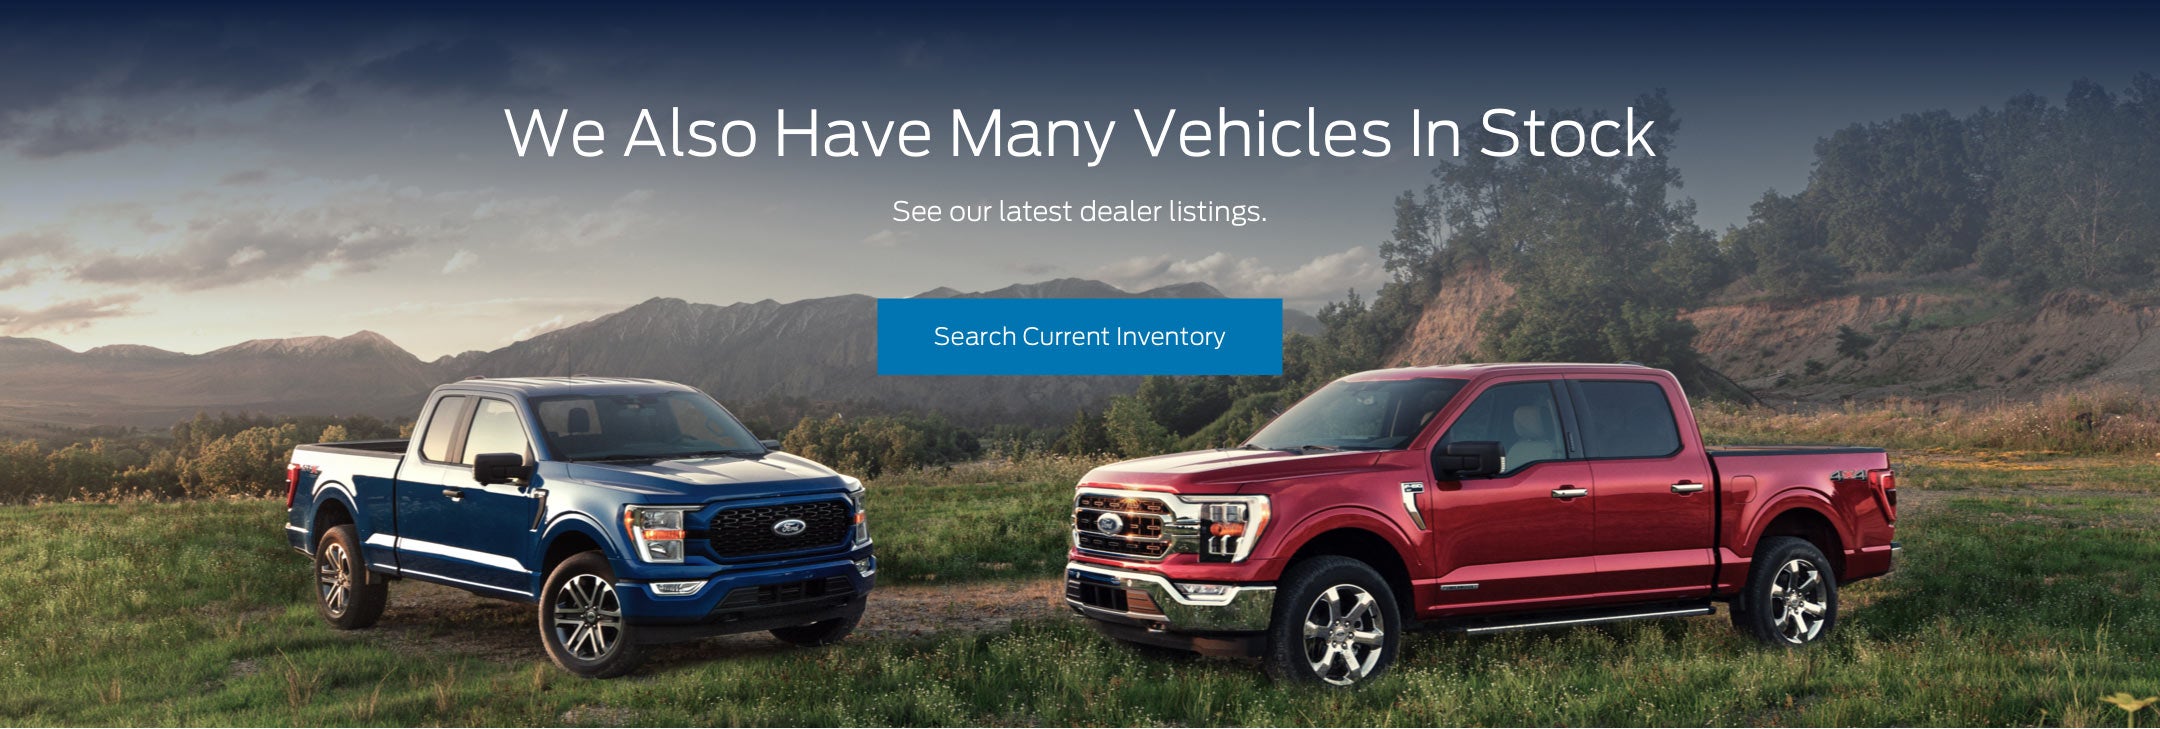 Ford vehicles in stock | Coughlin Ford of Pataskala in Pataskala OH